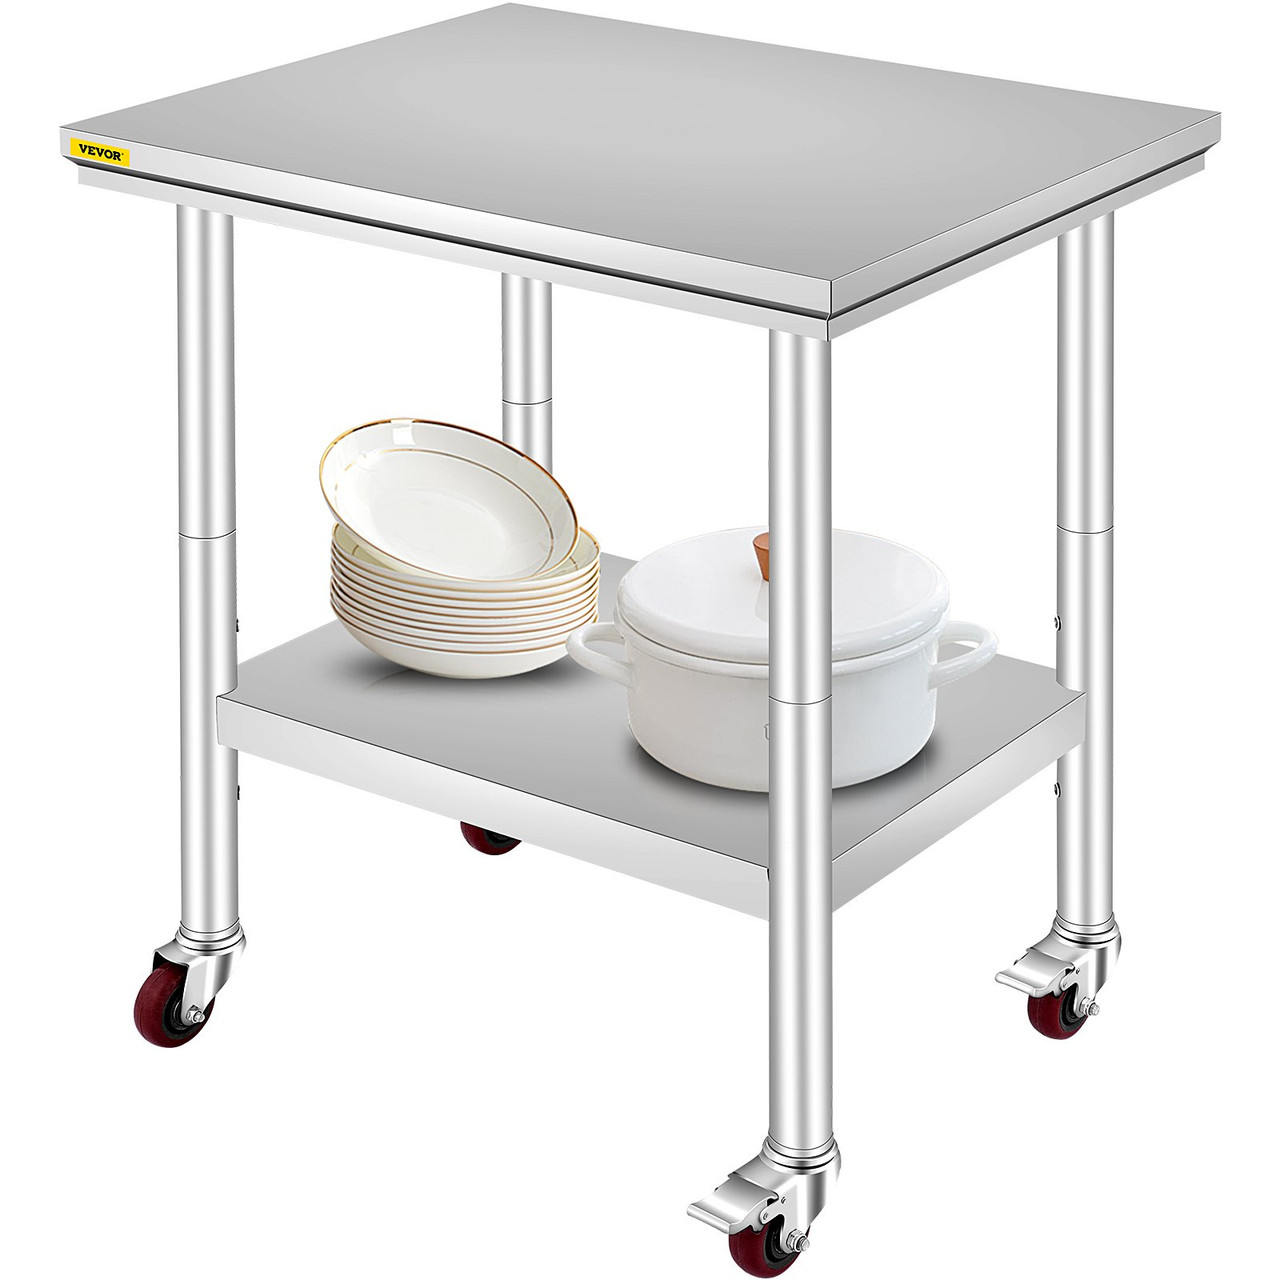 Stainless Steel Work Table with Wheels 24 x 30 Prep Table with casters Heavy Duty Work Table for Commercial Kitchen Restaurant Business (24 x 30 x 32 Inch)